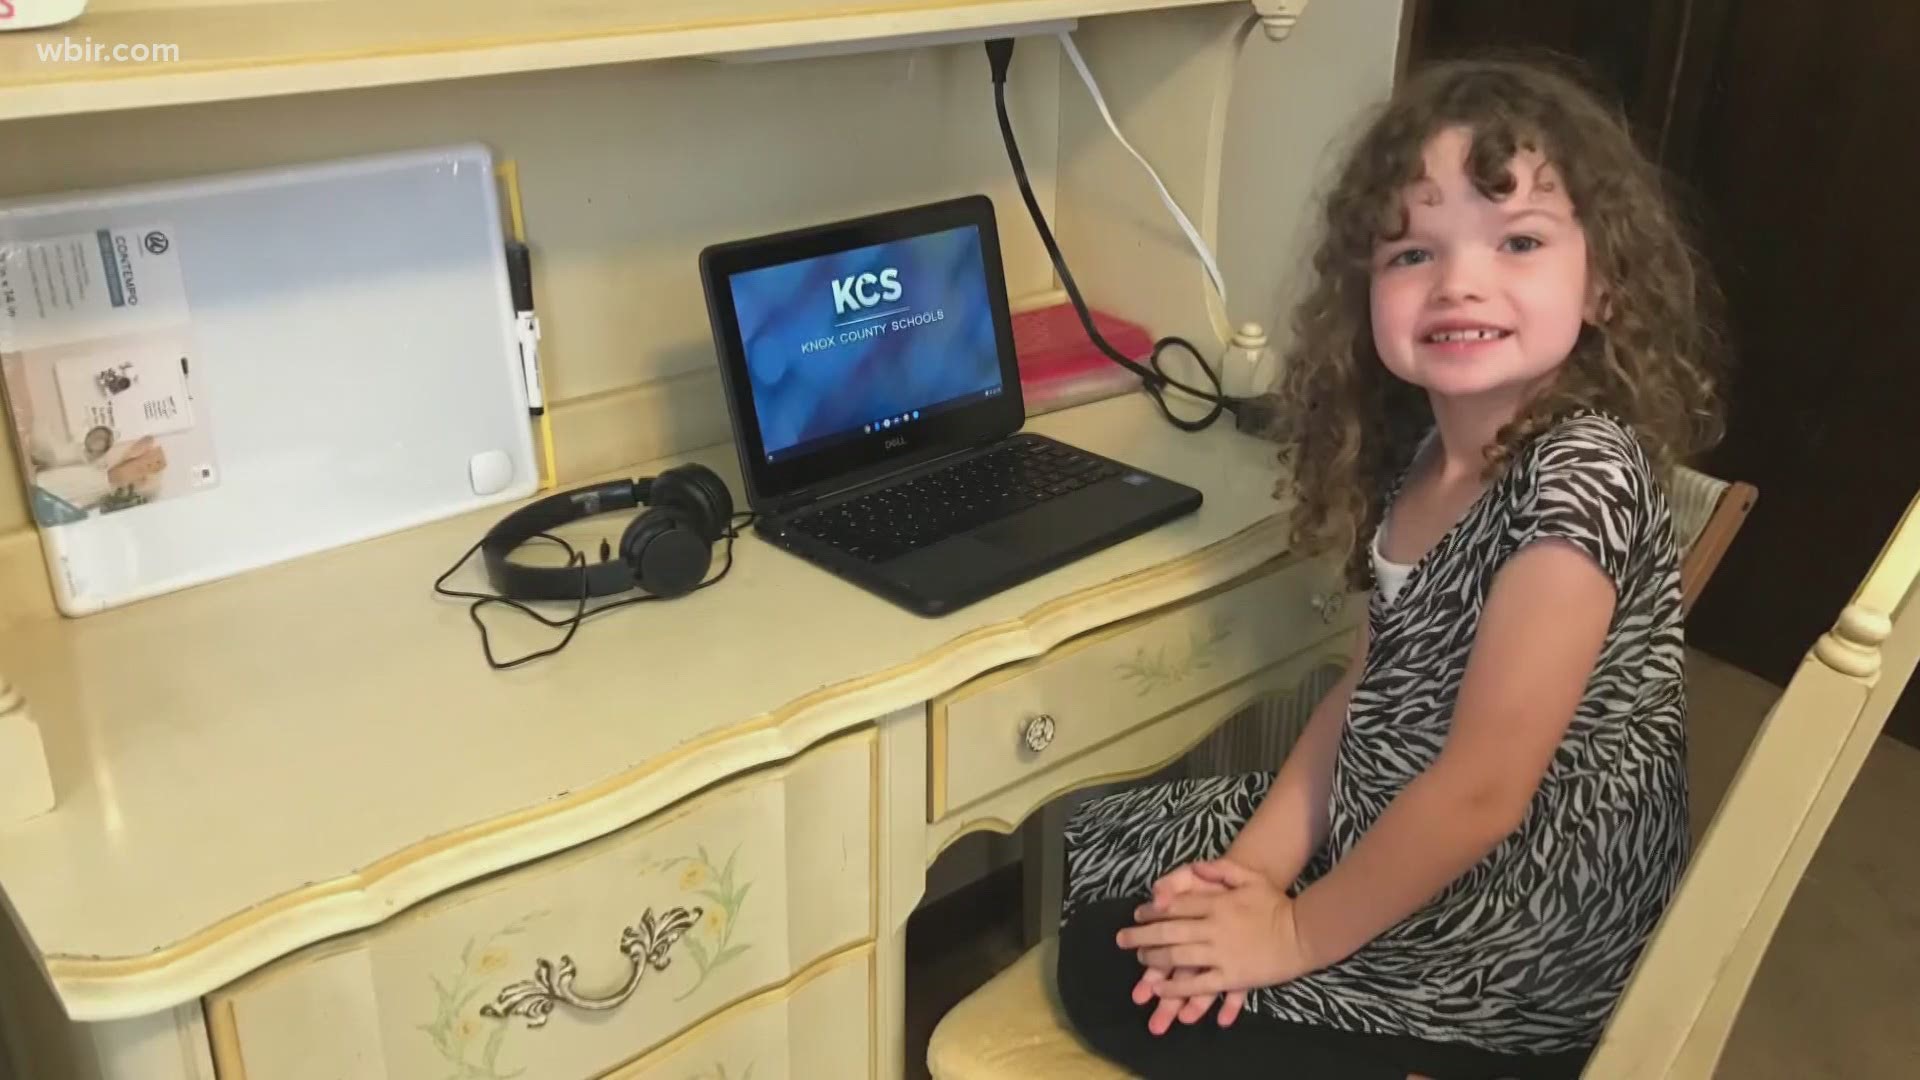 Online school means more freedom and inclusion for a Knoxville second grader battling cancer.